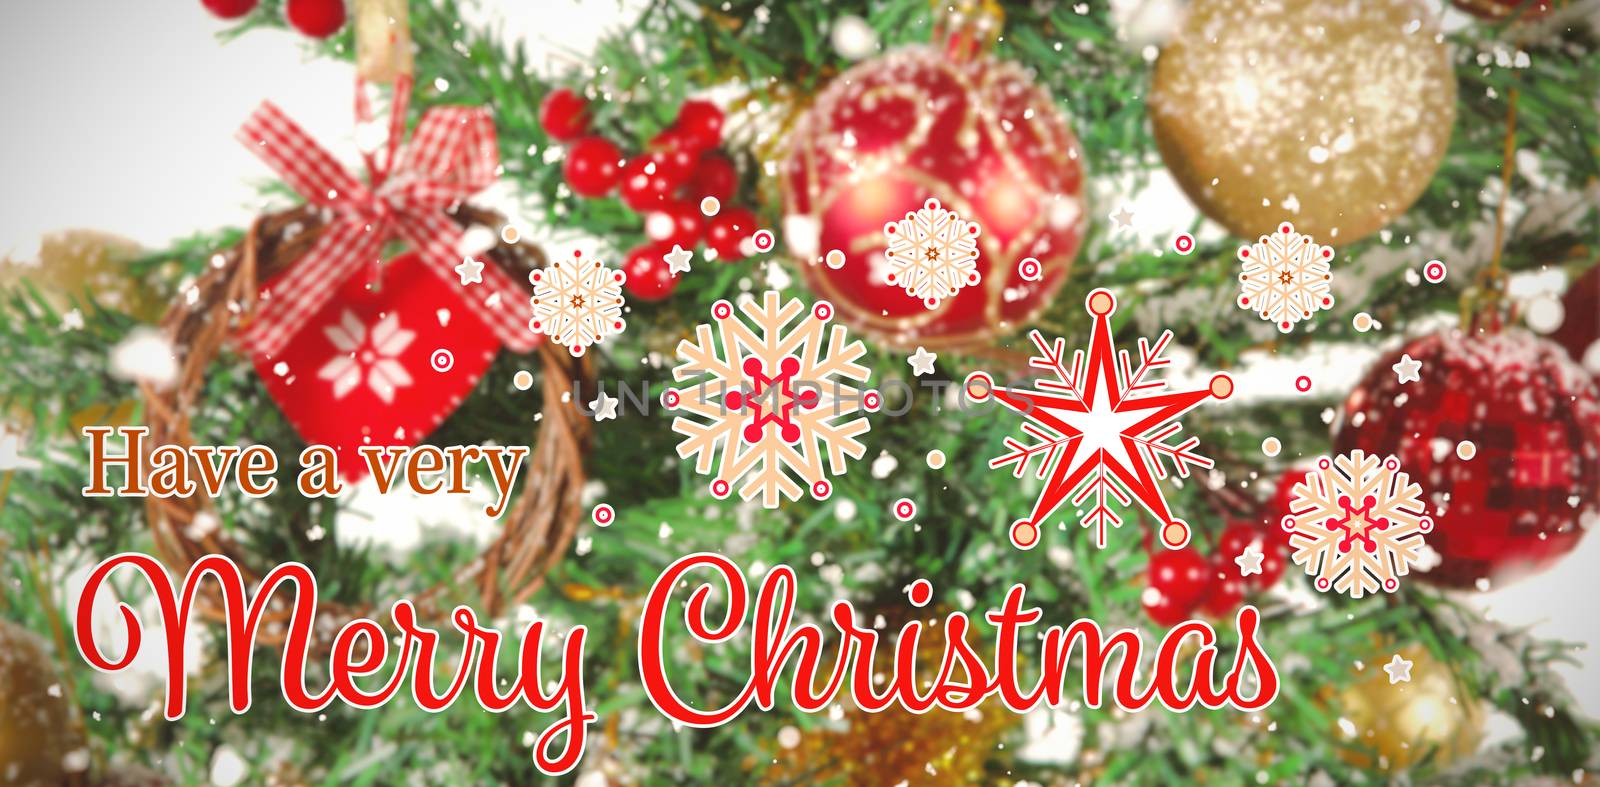 Christmas card against close-up of christmas tree with decorations